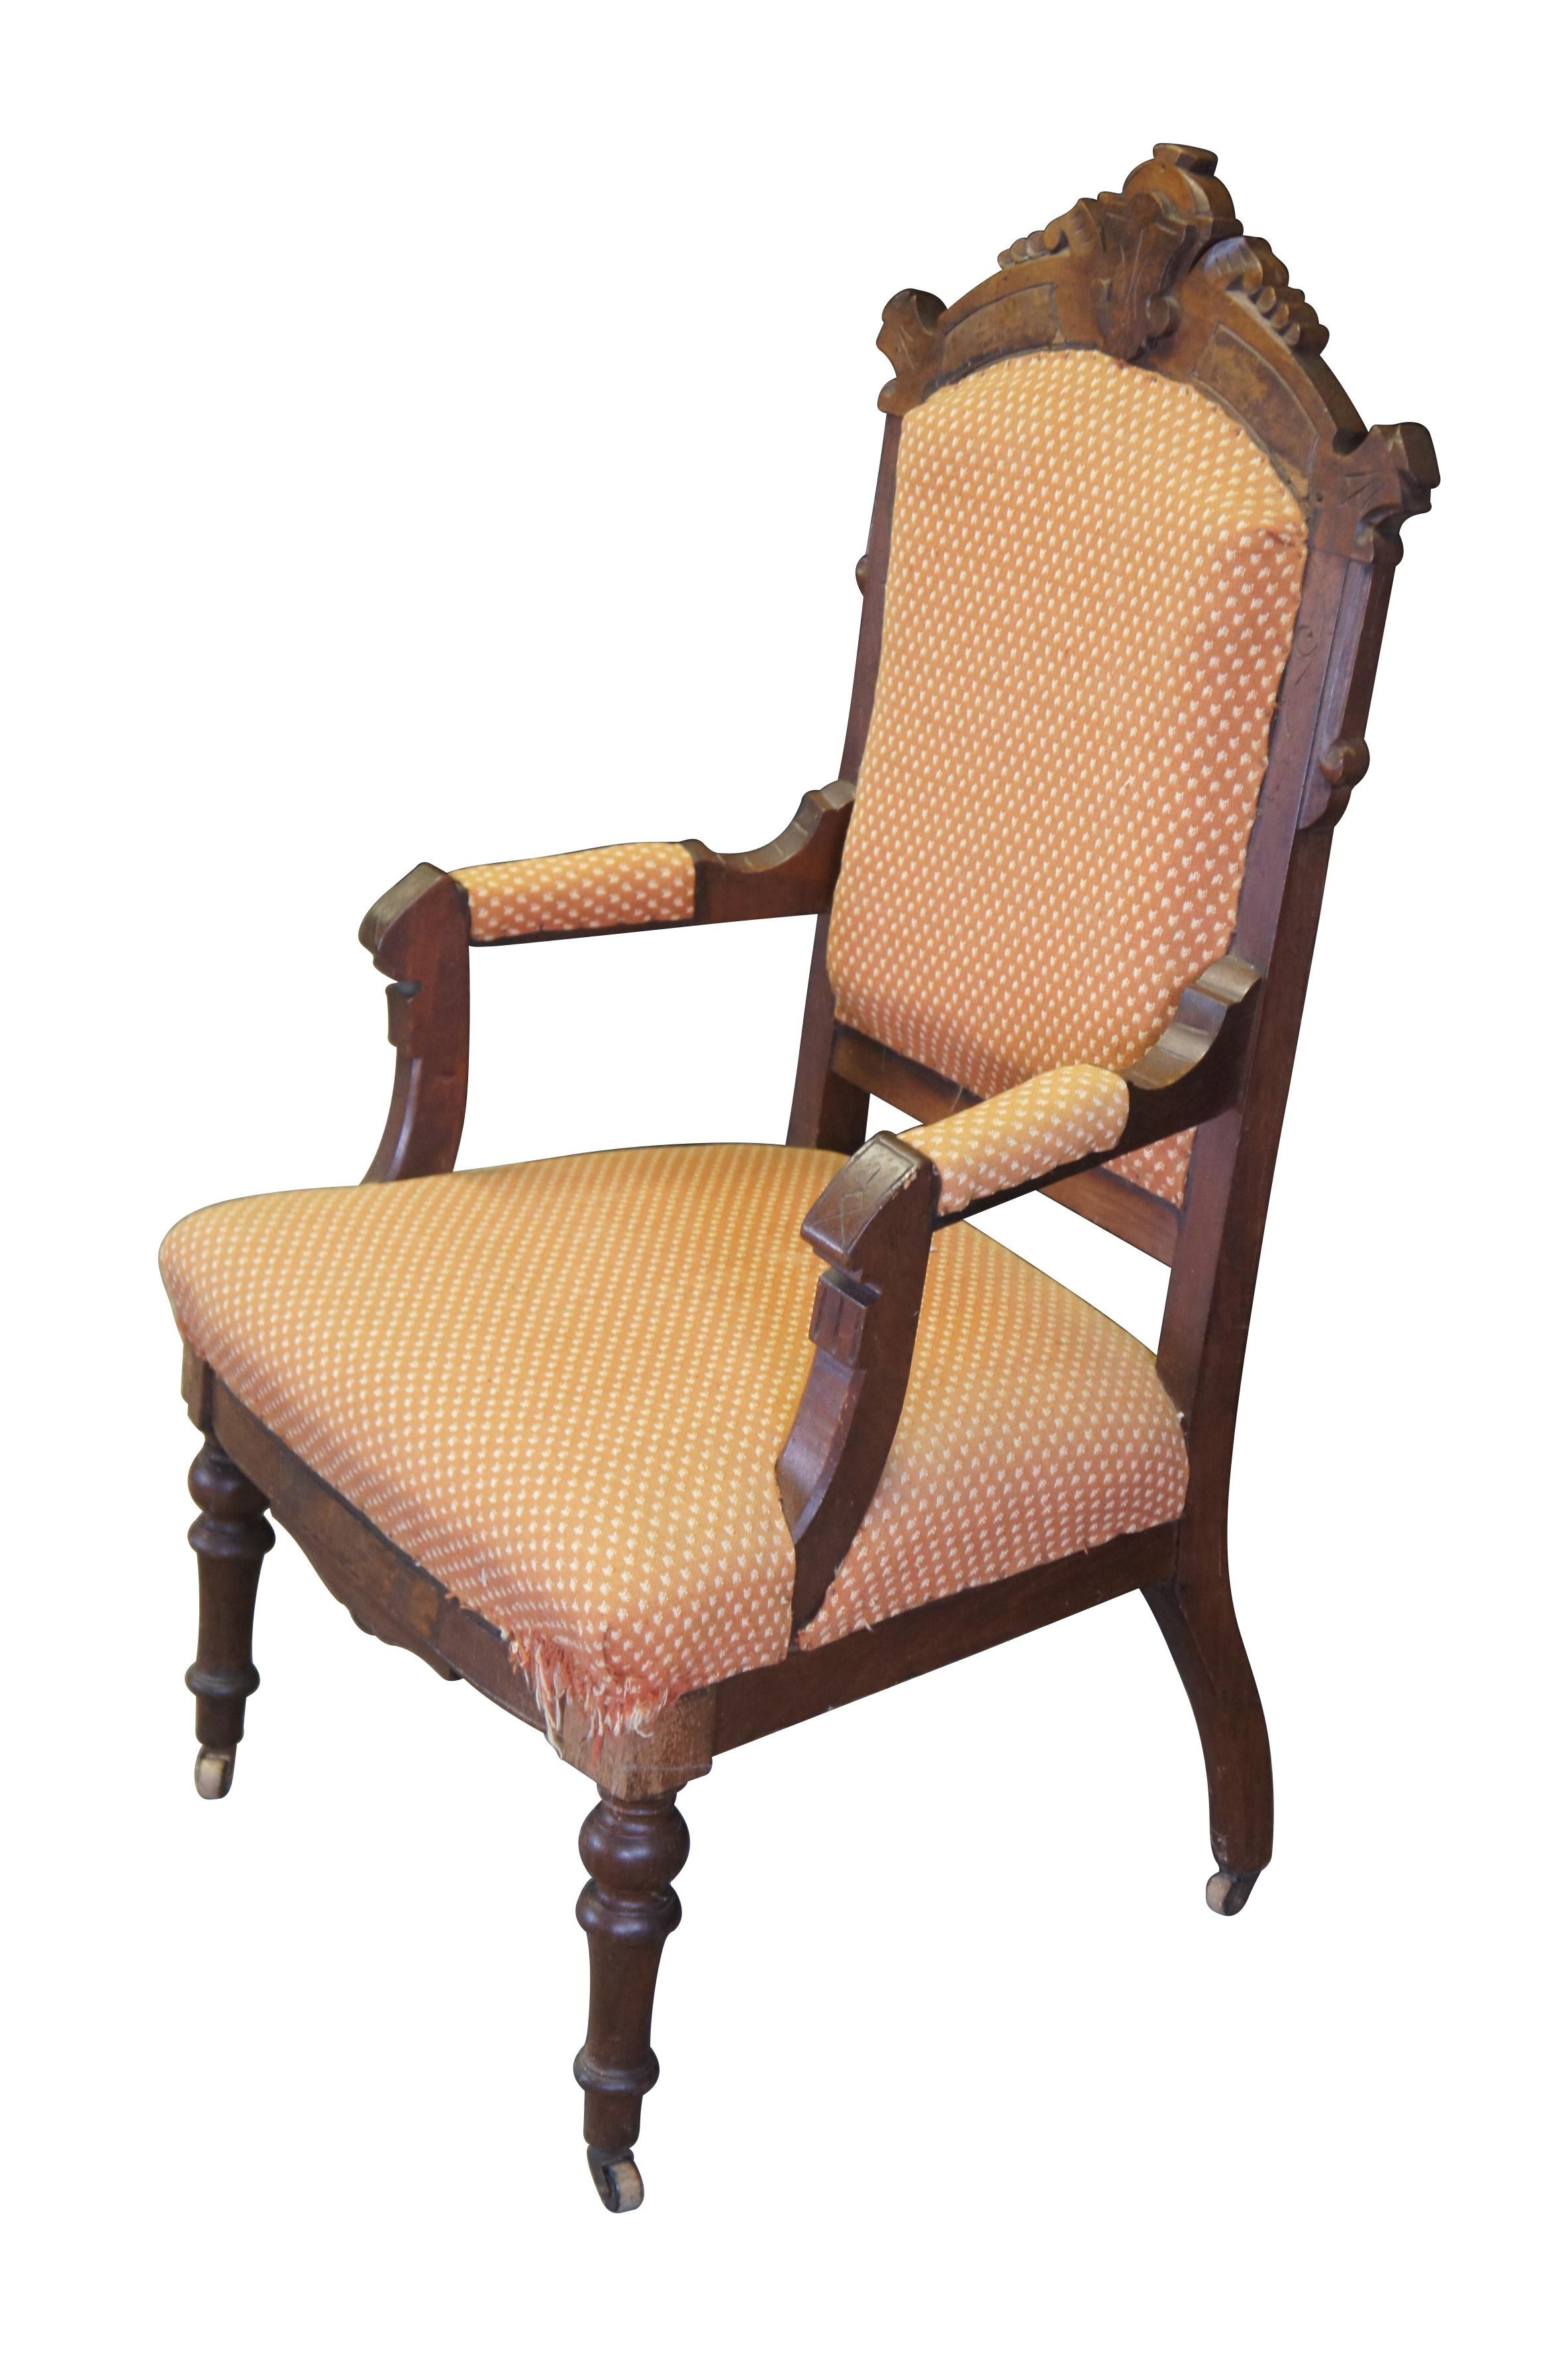 Antique Victorian Eastlake Carved Walnut Gentlemans Parlor Fauteuil Arm Chair  In Good Condition For Sale In Dayton, OH